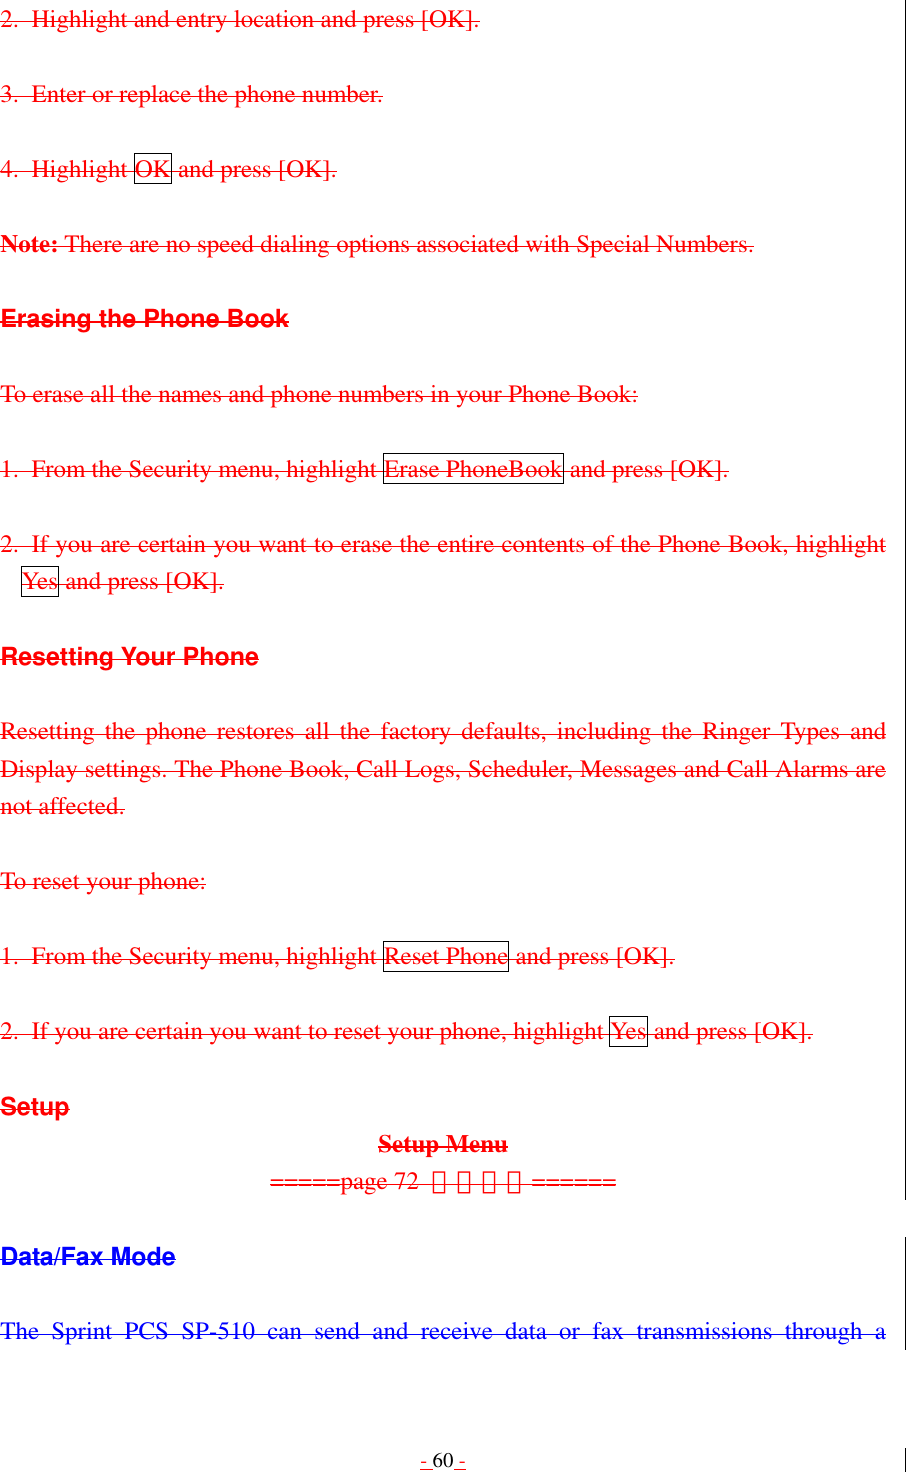 - 60 - 2.  Highlight and entry location and press [OK].  3.  Enter or replace the phone number.  4. Highlight OK and press [OK].  Note: There are no speed dialing options associated with Special Numbers.  Erasing the Phone Book  To erase all the names and phone numbers in your Phone Book:  1. From the Security menu, highlight Erase PhoneBook and press [OK].  2.  If you are certain you want to erase the entire contents of the Phone Book, highlight Yes and press [OK].  Resetting Your Phone  Resetting the phone restores all the factory defaults, including the Ringer Types and Display settings. The Phone Book, Call Logs, Scheduler, Messages and Call Alarms are not affected.  To reset your phone:  1.  From the Security menu, highlight Reset Phone and press [OK].  2.  If you are certain you want to reset your phone, highlight Yes and press [OK].  Setup Setup Menu =====page 72  그림추가======  Data/Fax Mode  The Sprint PCS SP-510 can send and receive data or fax transmissions through a 